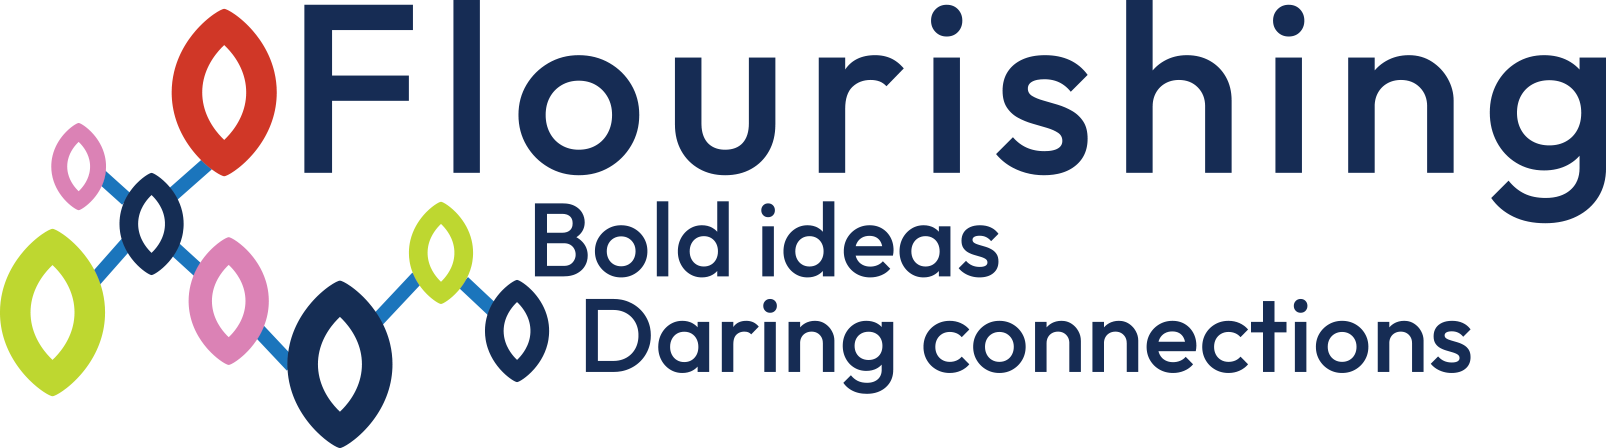 Flourishing Bold Ideas and Daring Connections